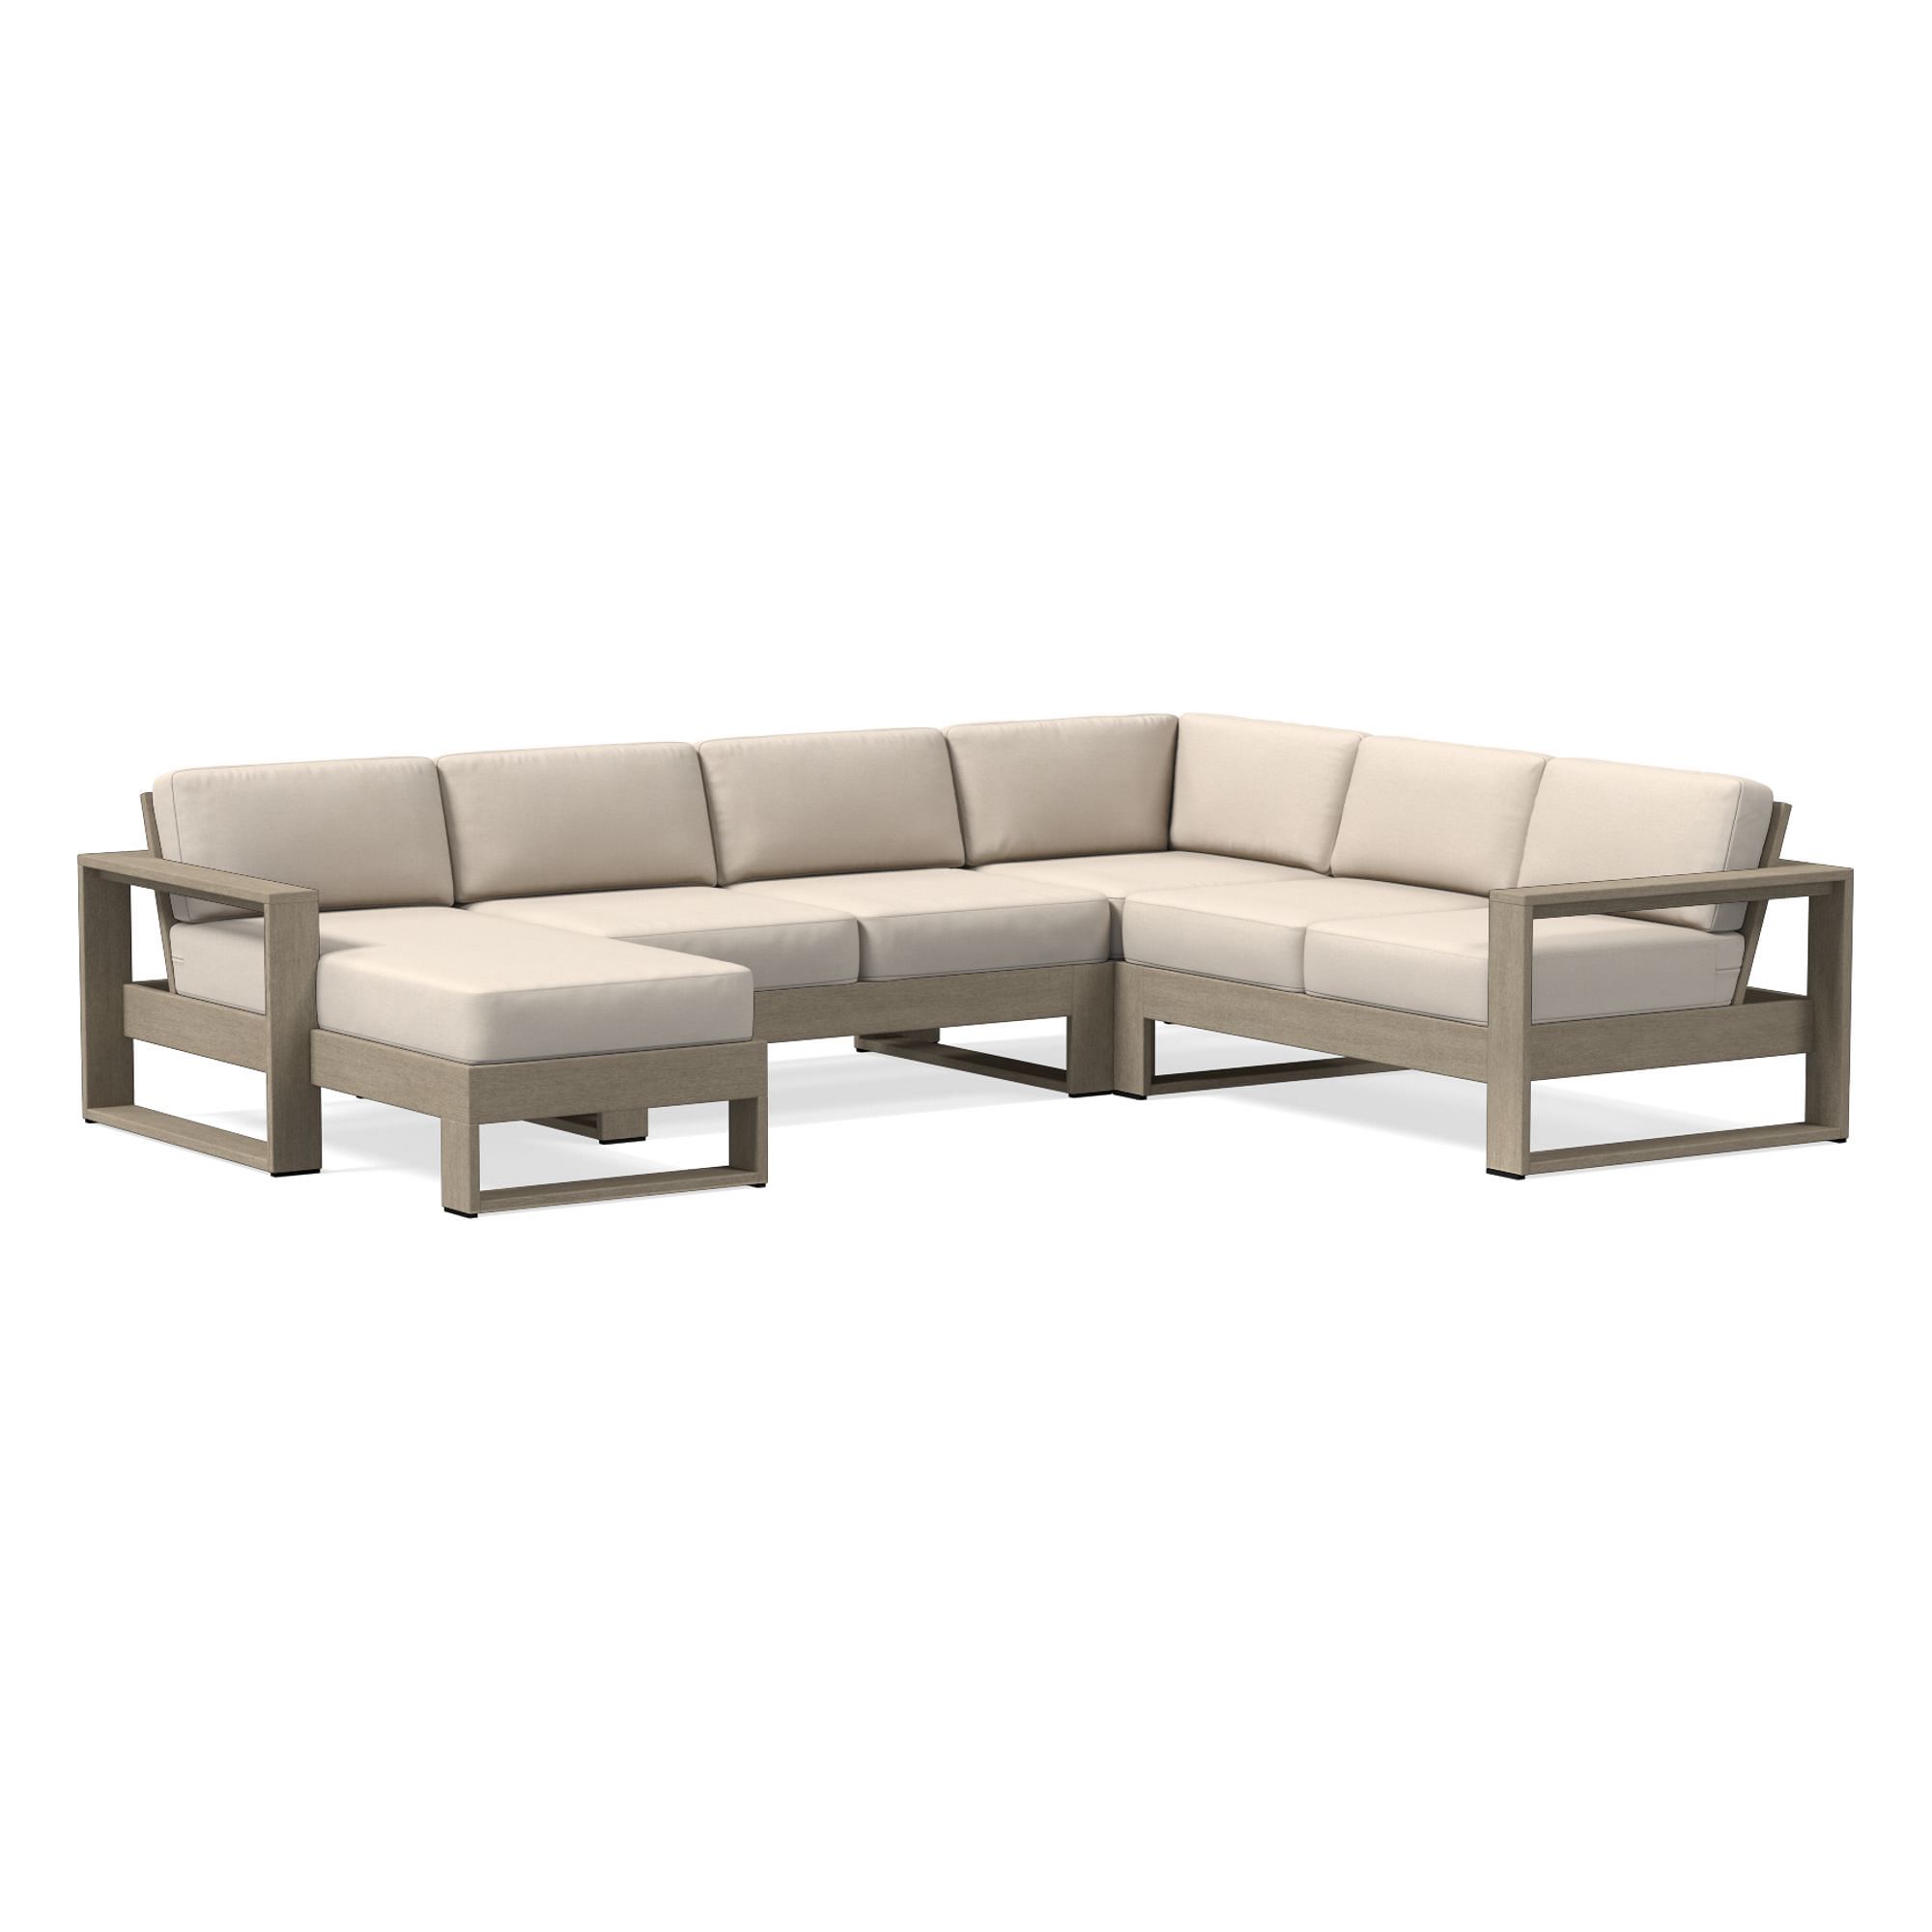 Portside Outdoor -Piece Chaise Sectional Cushion Covers | West Elm